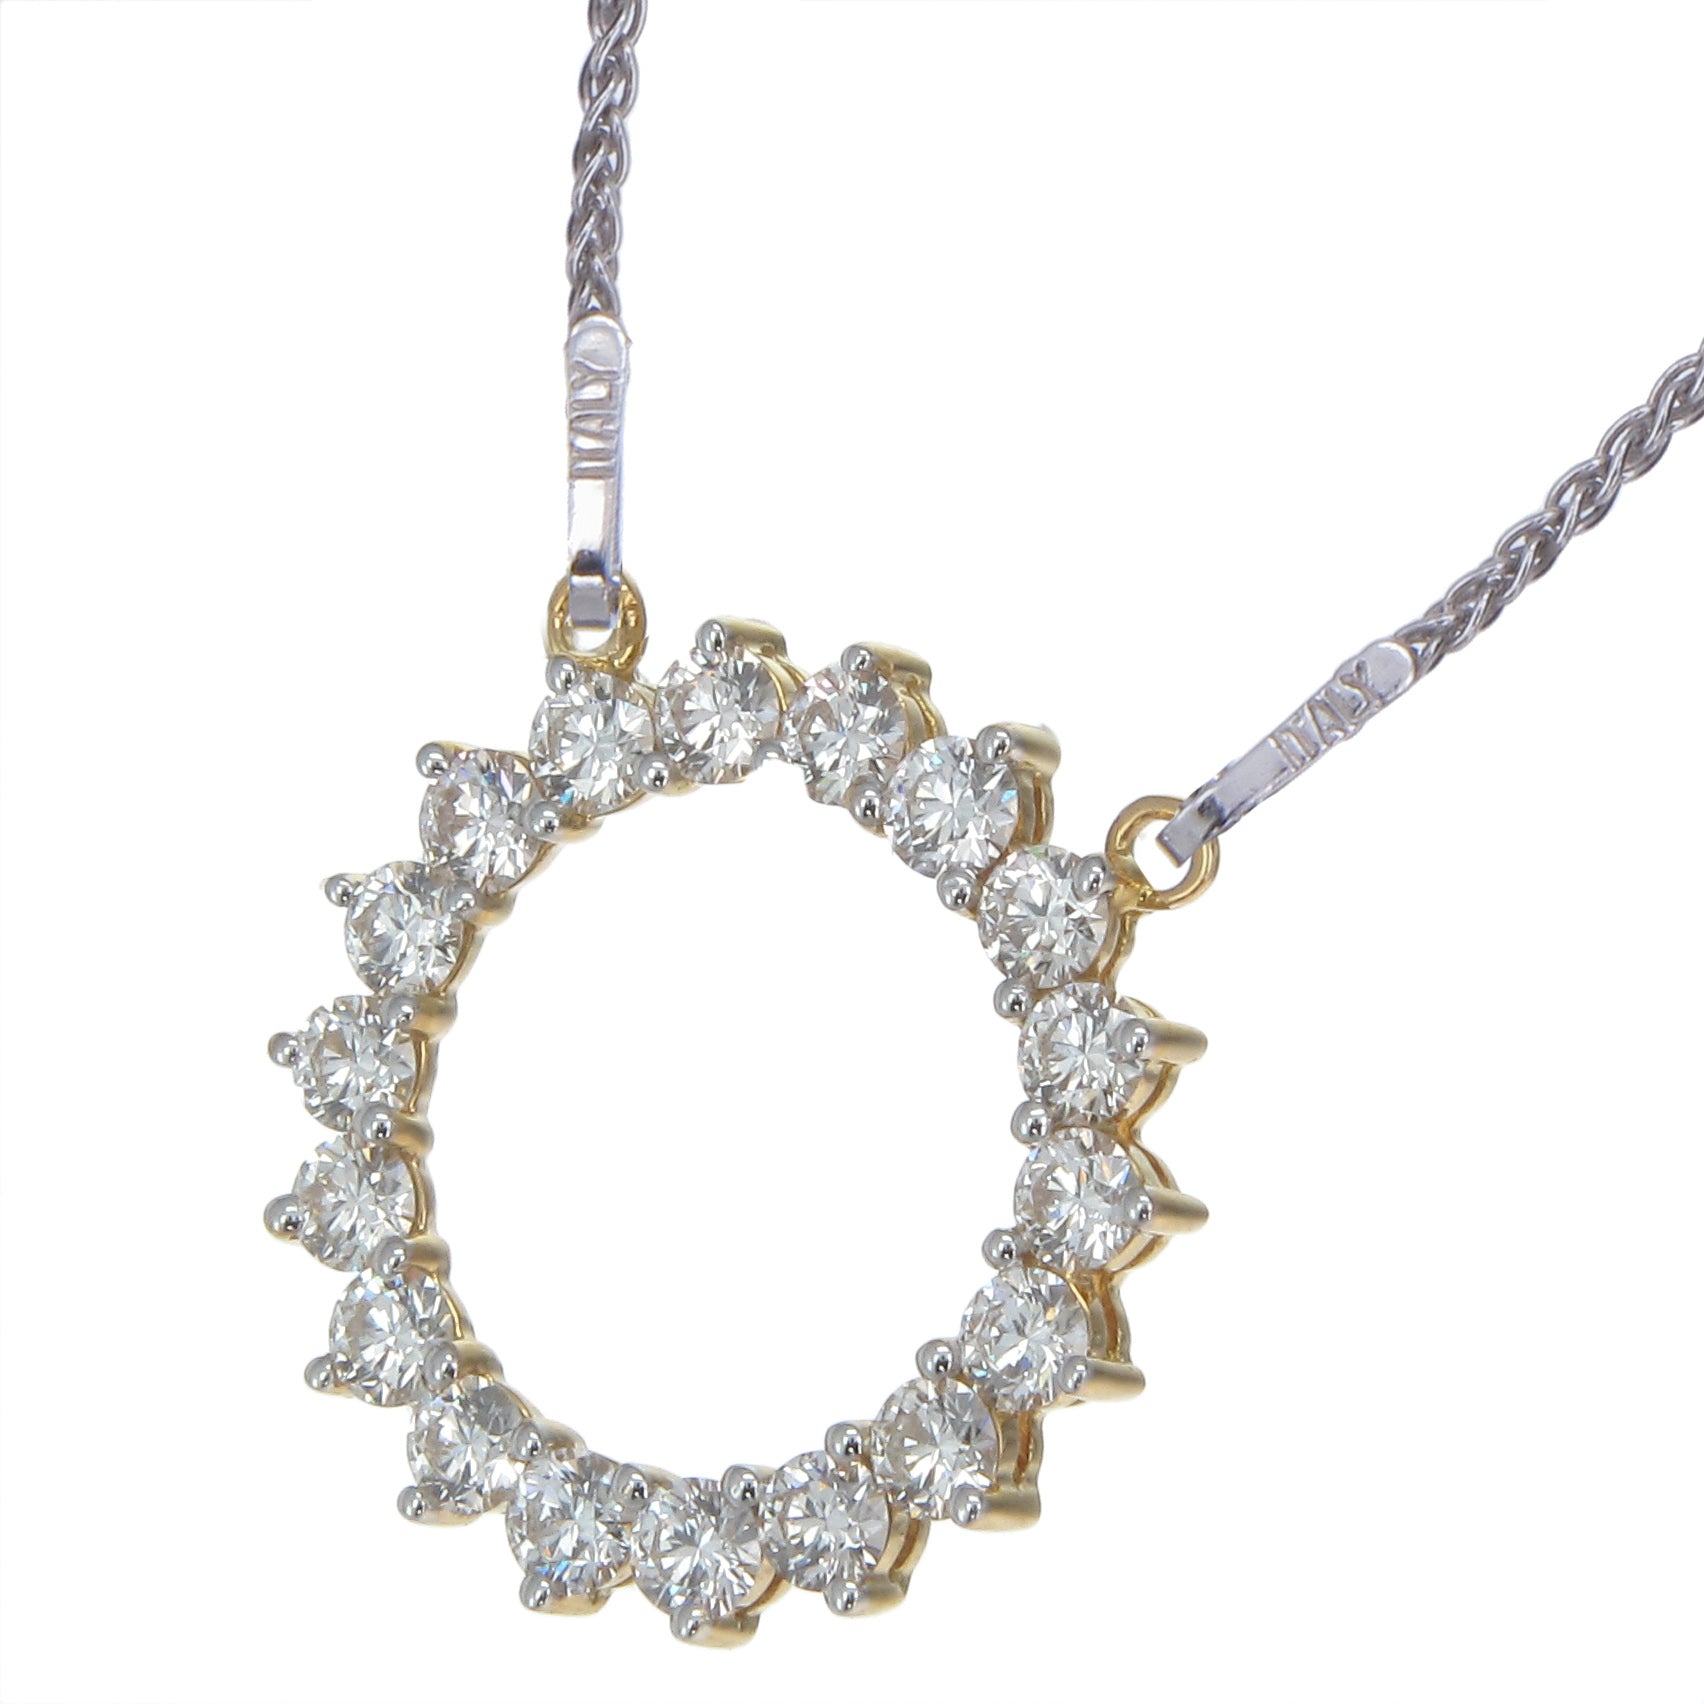 2 cttw Diamond Pendant, Diamond Circle Pendant Necklace for Women in 14K Yellow Gold with 18 Inch Chain, Prong Setting